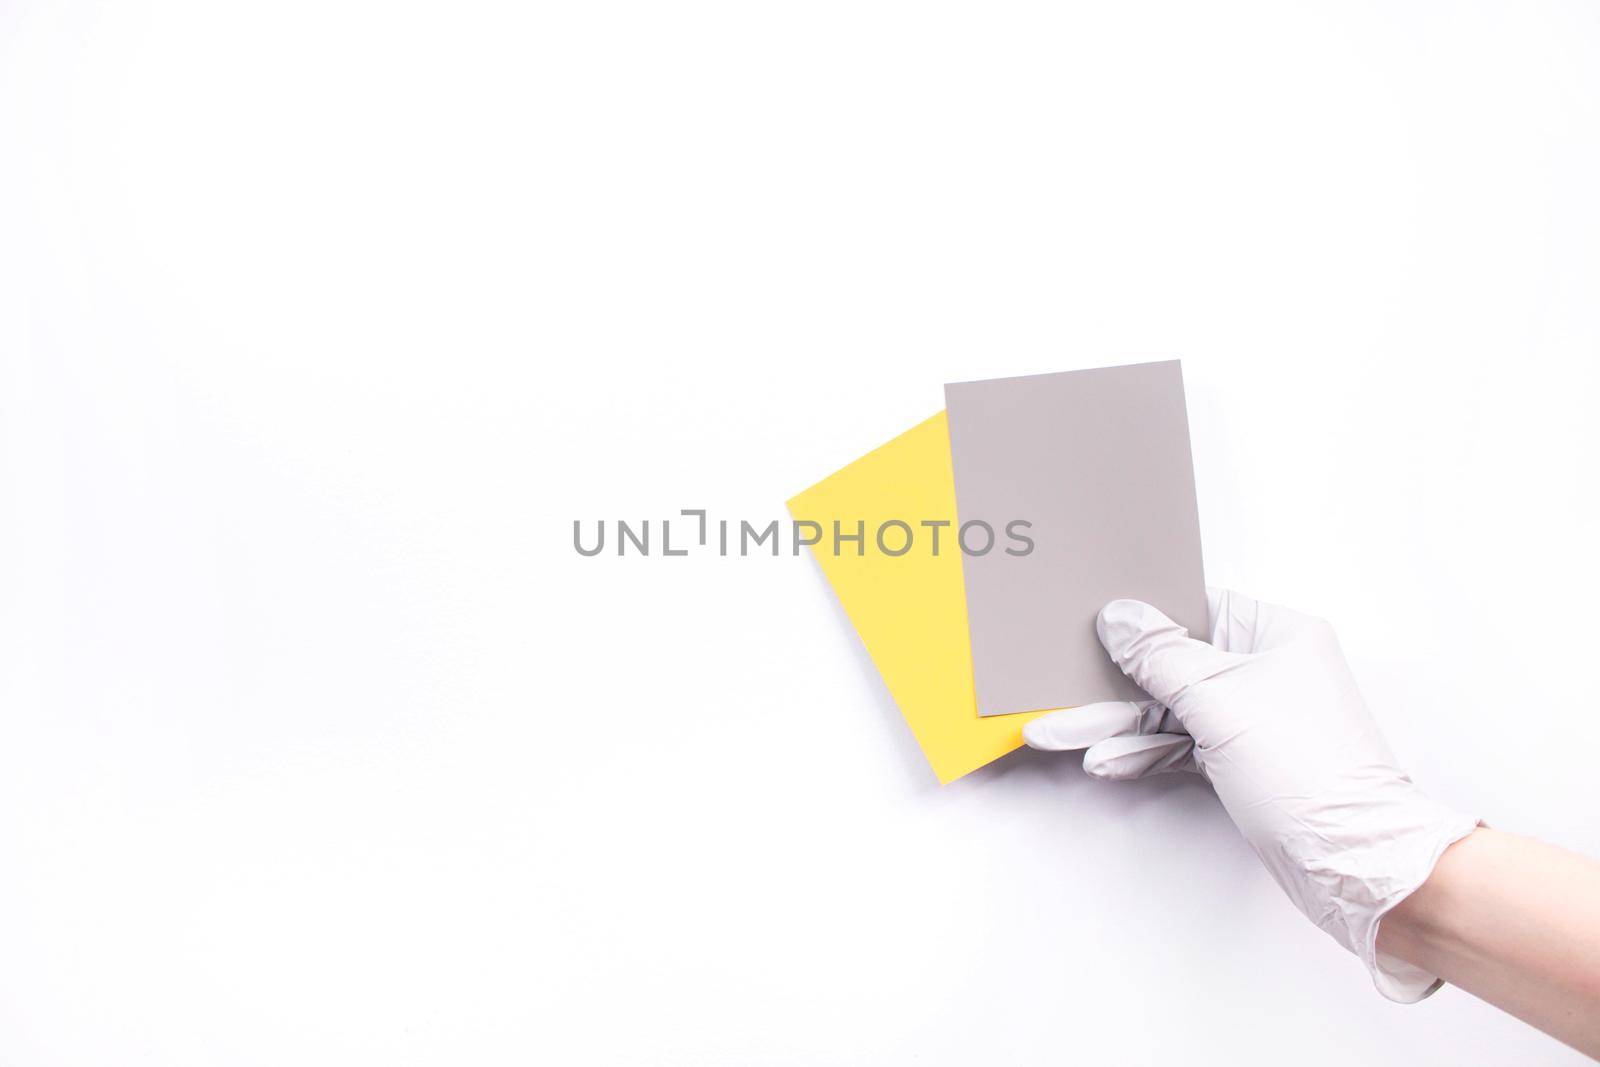 Women's hands hold swatches of the trendy colors - illuminating yellow and ultimate grey. Selection of year 2021 colors for design of clothes, interiors, websites and publications. Flat lay.